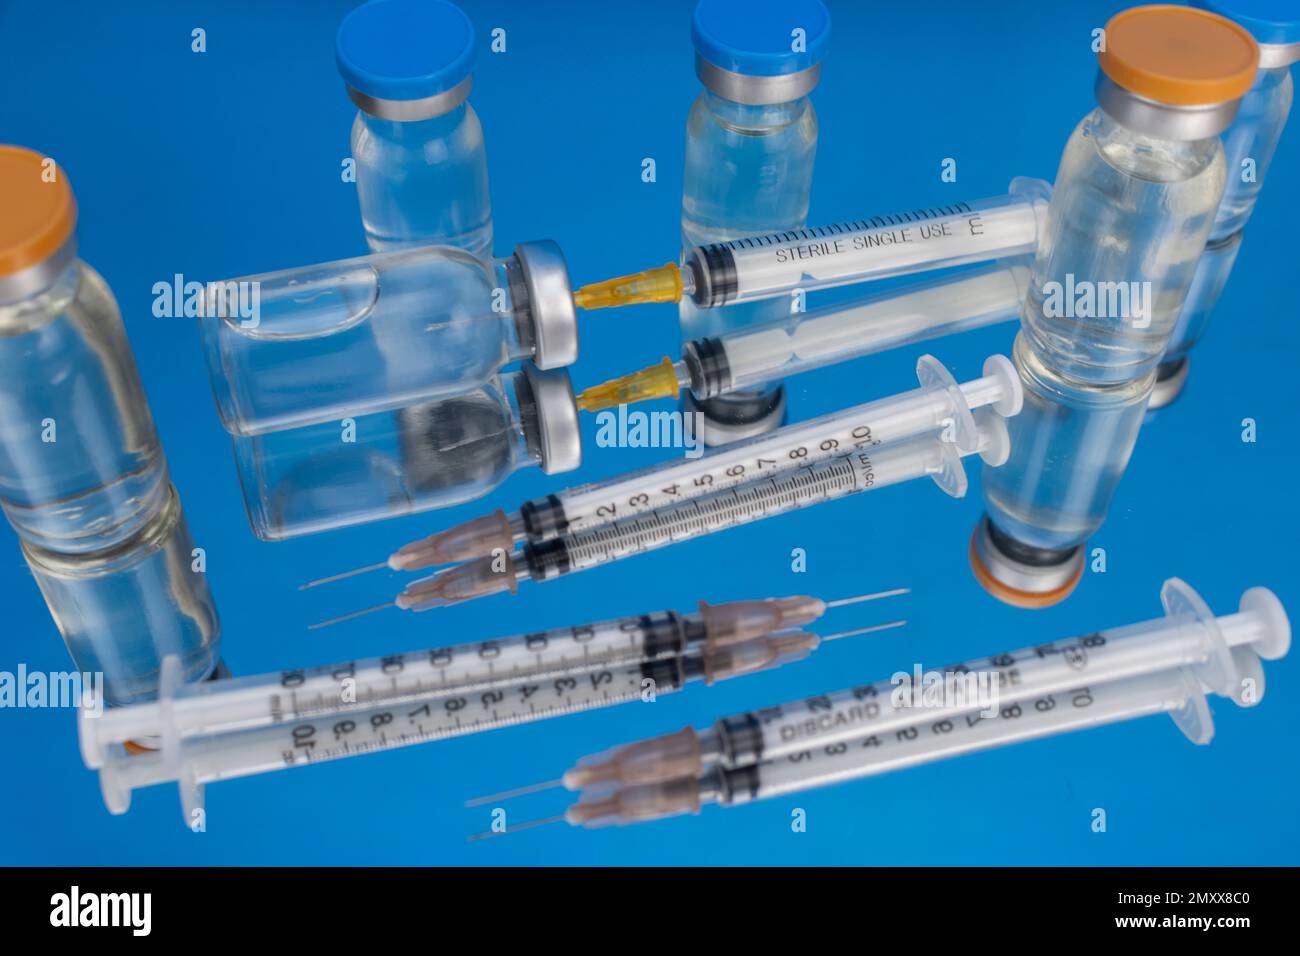 Premium Photo  Ampoule bottle with insulin needles and syringes for  medical subcutaneous injection